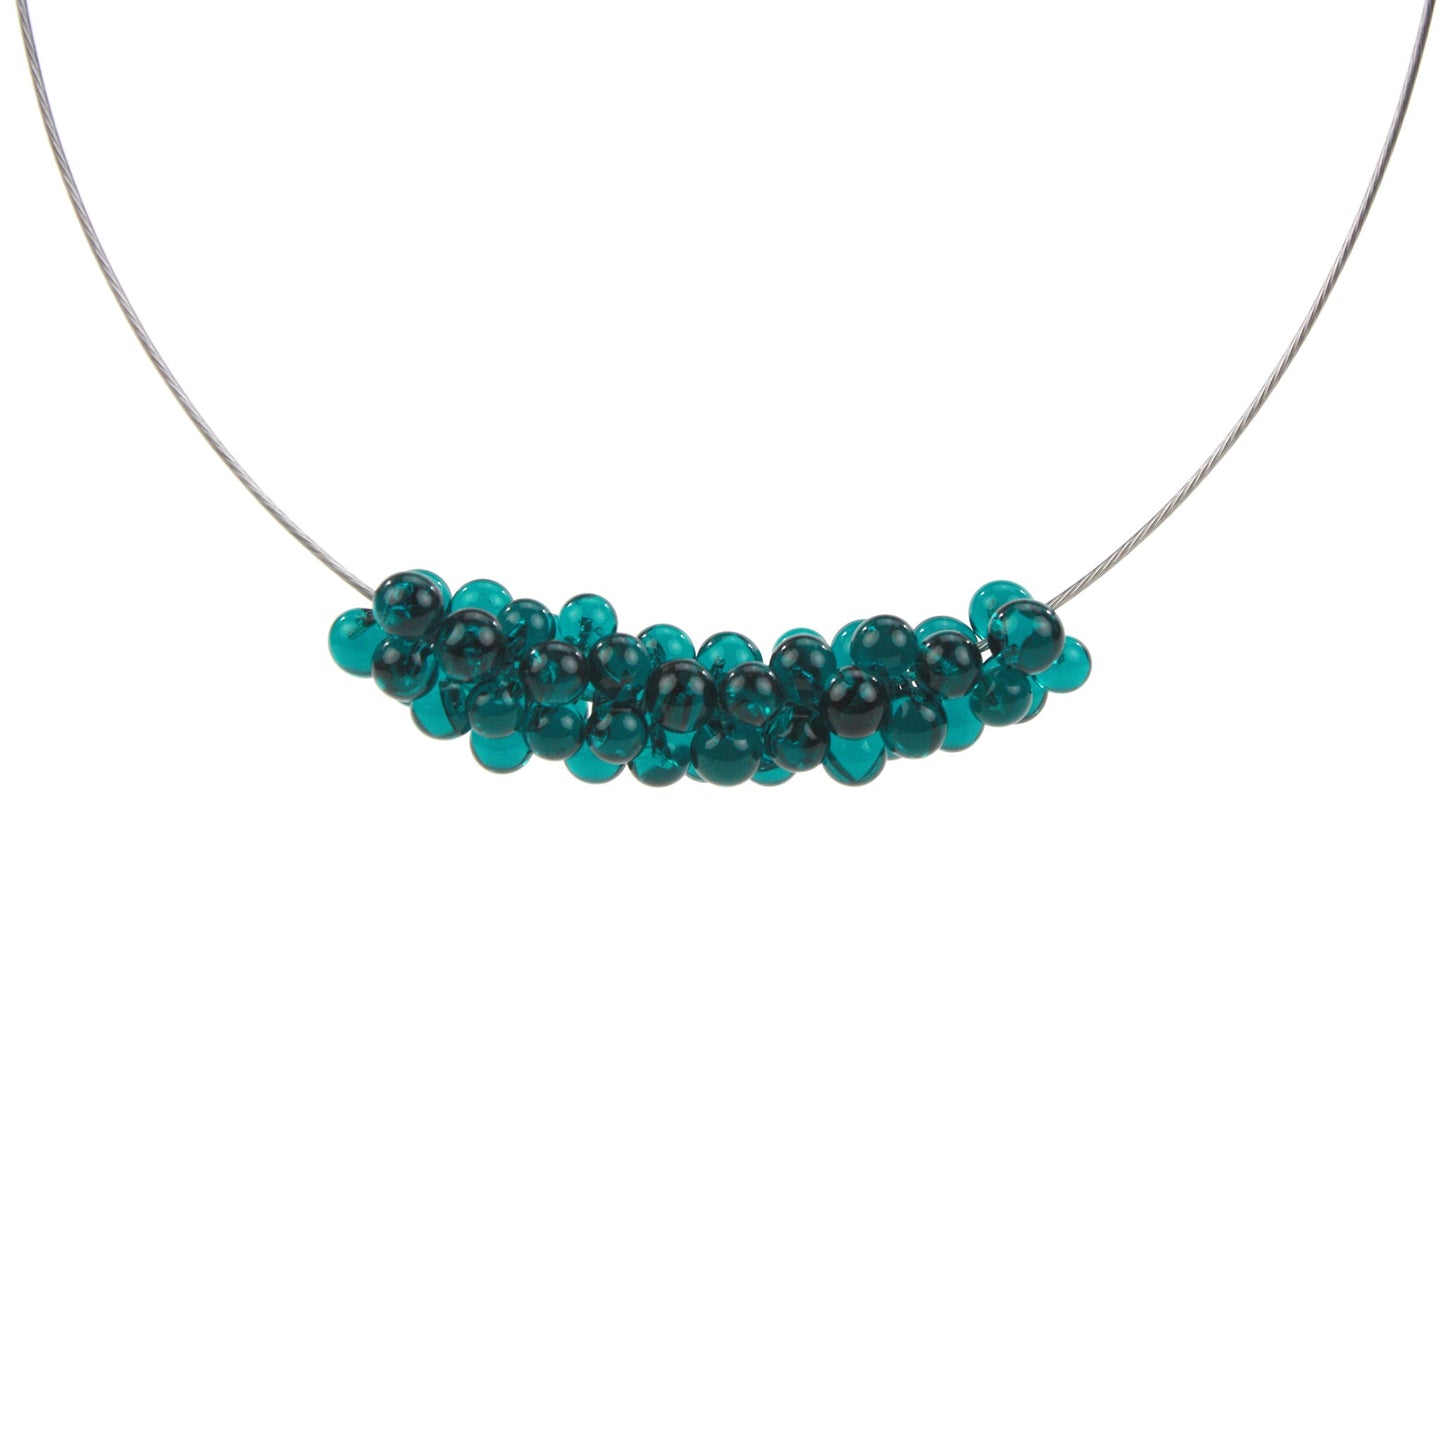 Petite Chroma Necklace in Teal